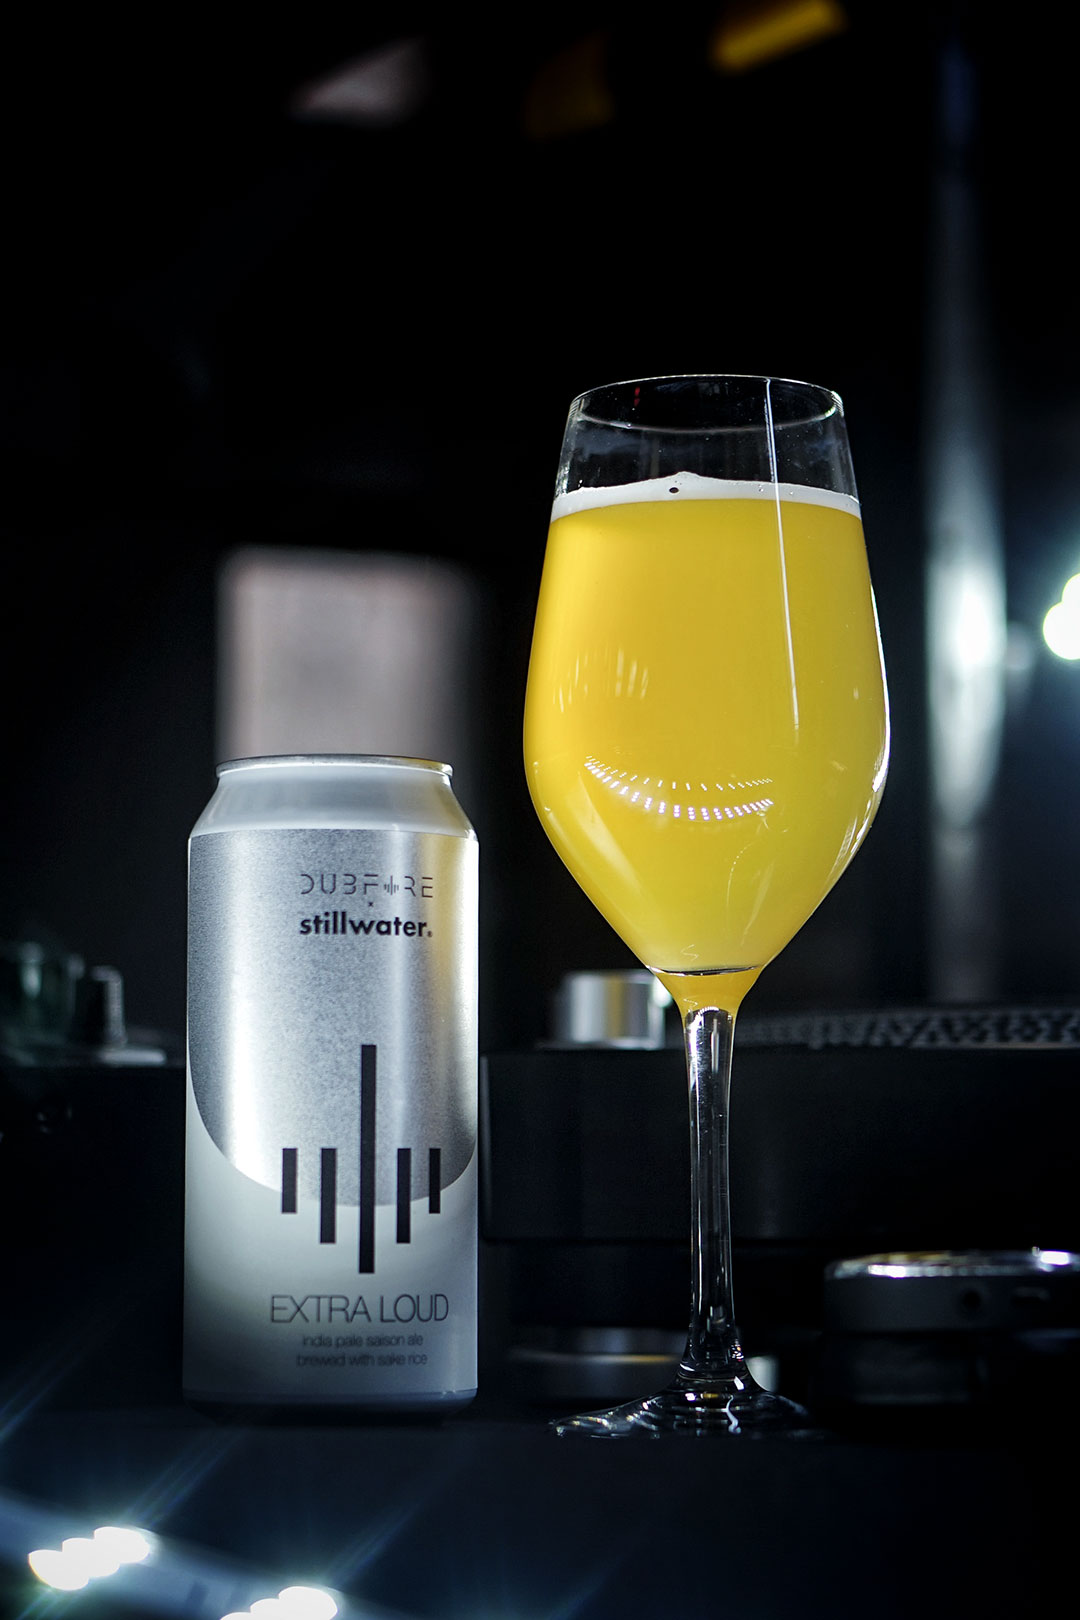 An image of Extra Loud in a stemmed beer glass with the can and dj equipment on a dark background